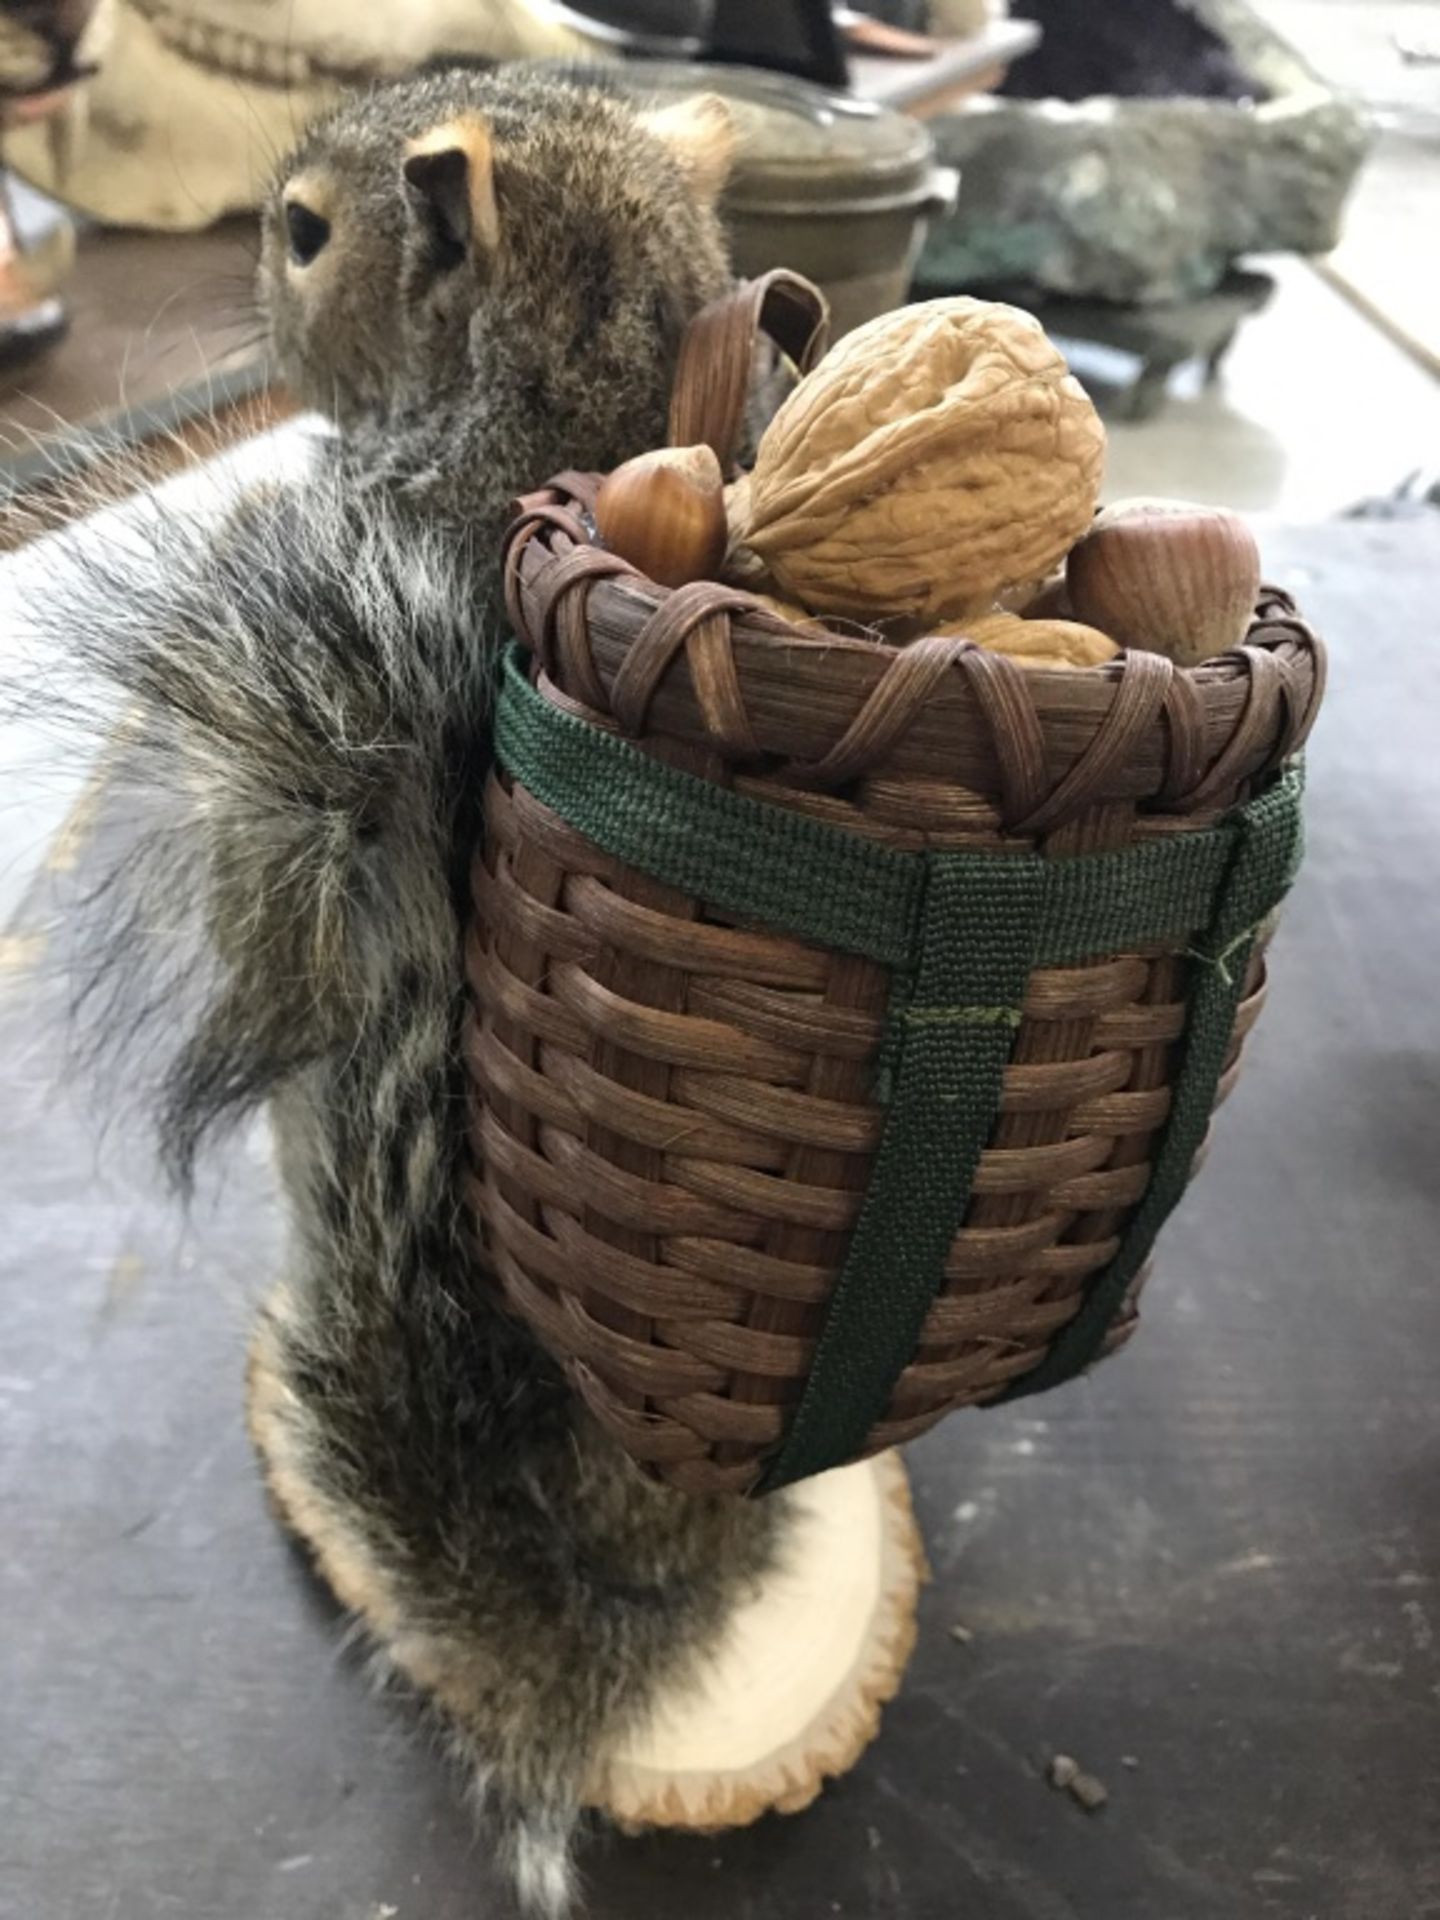 Squirrel, Back Packing - Image 13 of 13